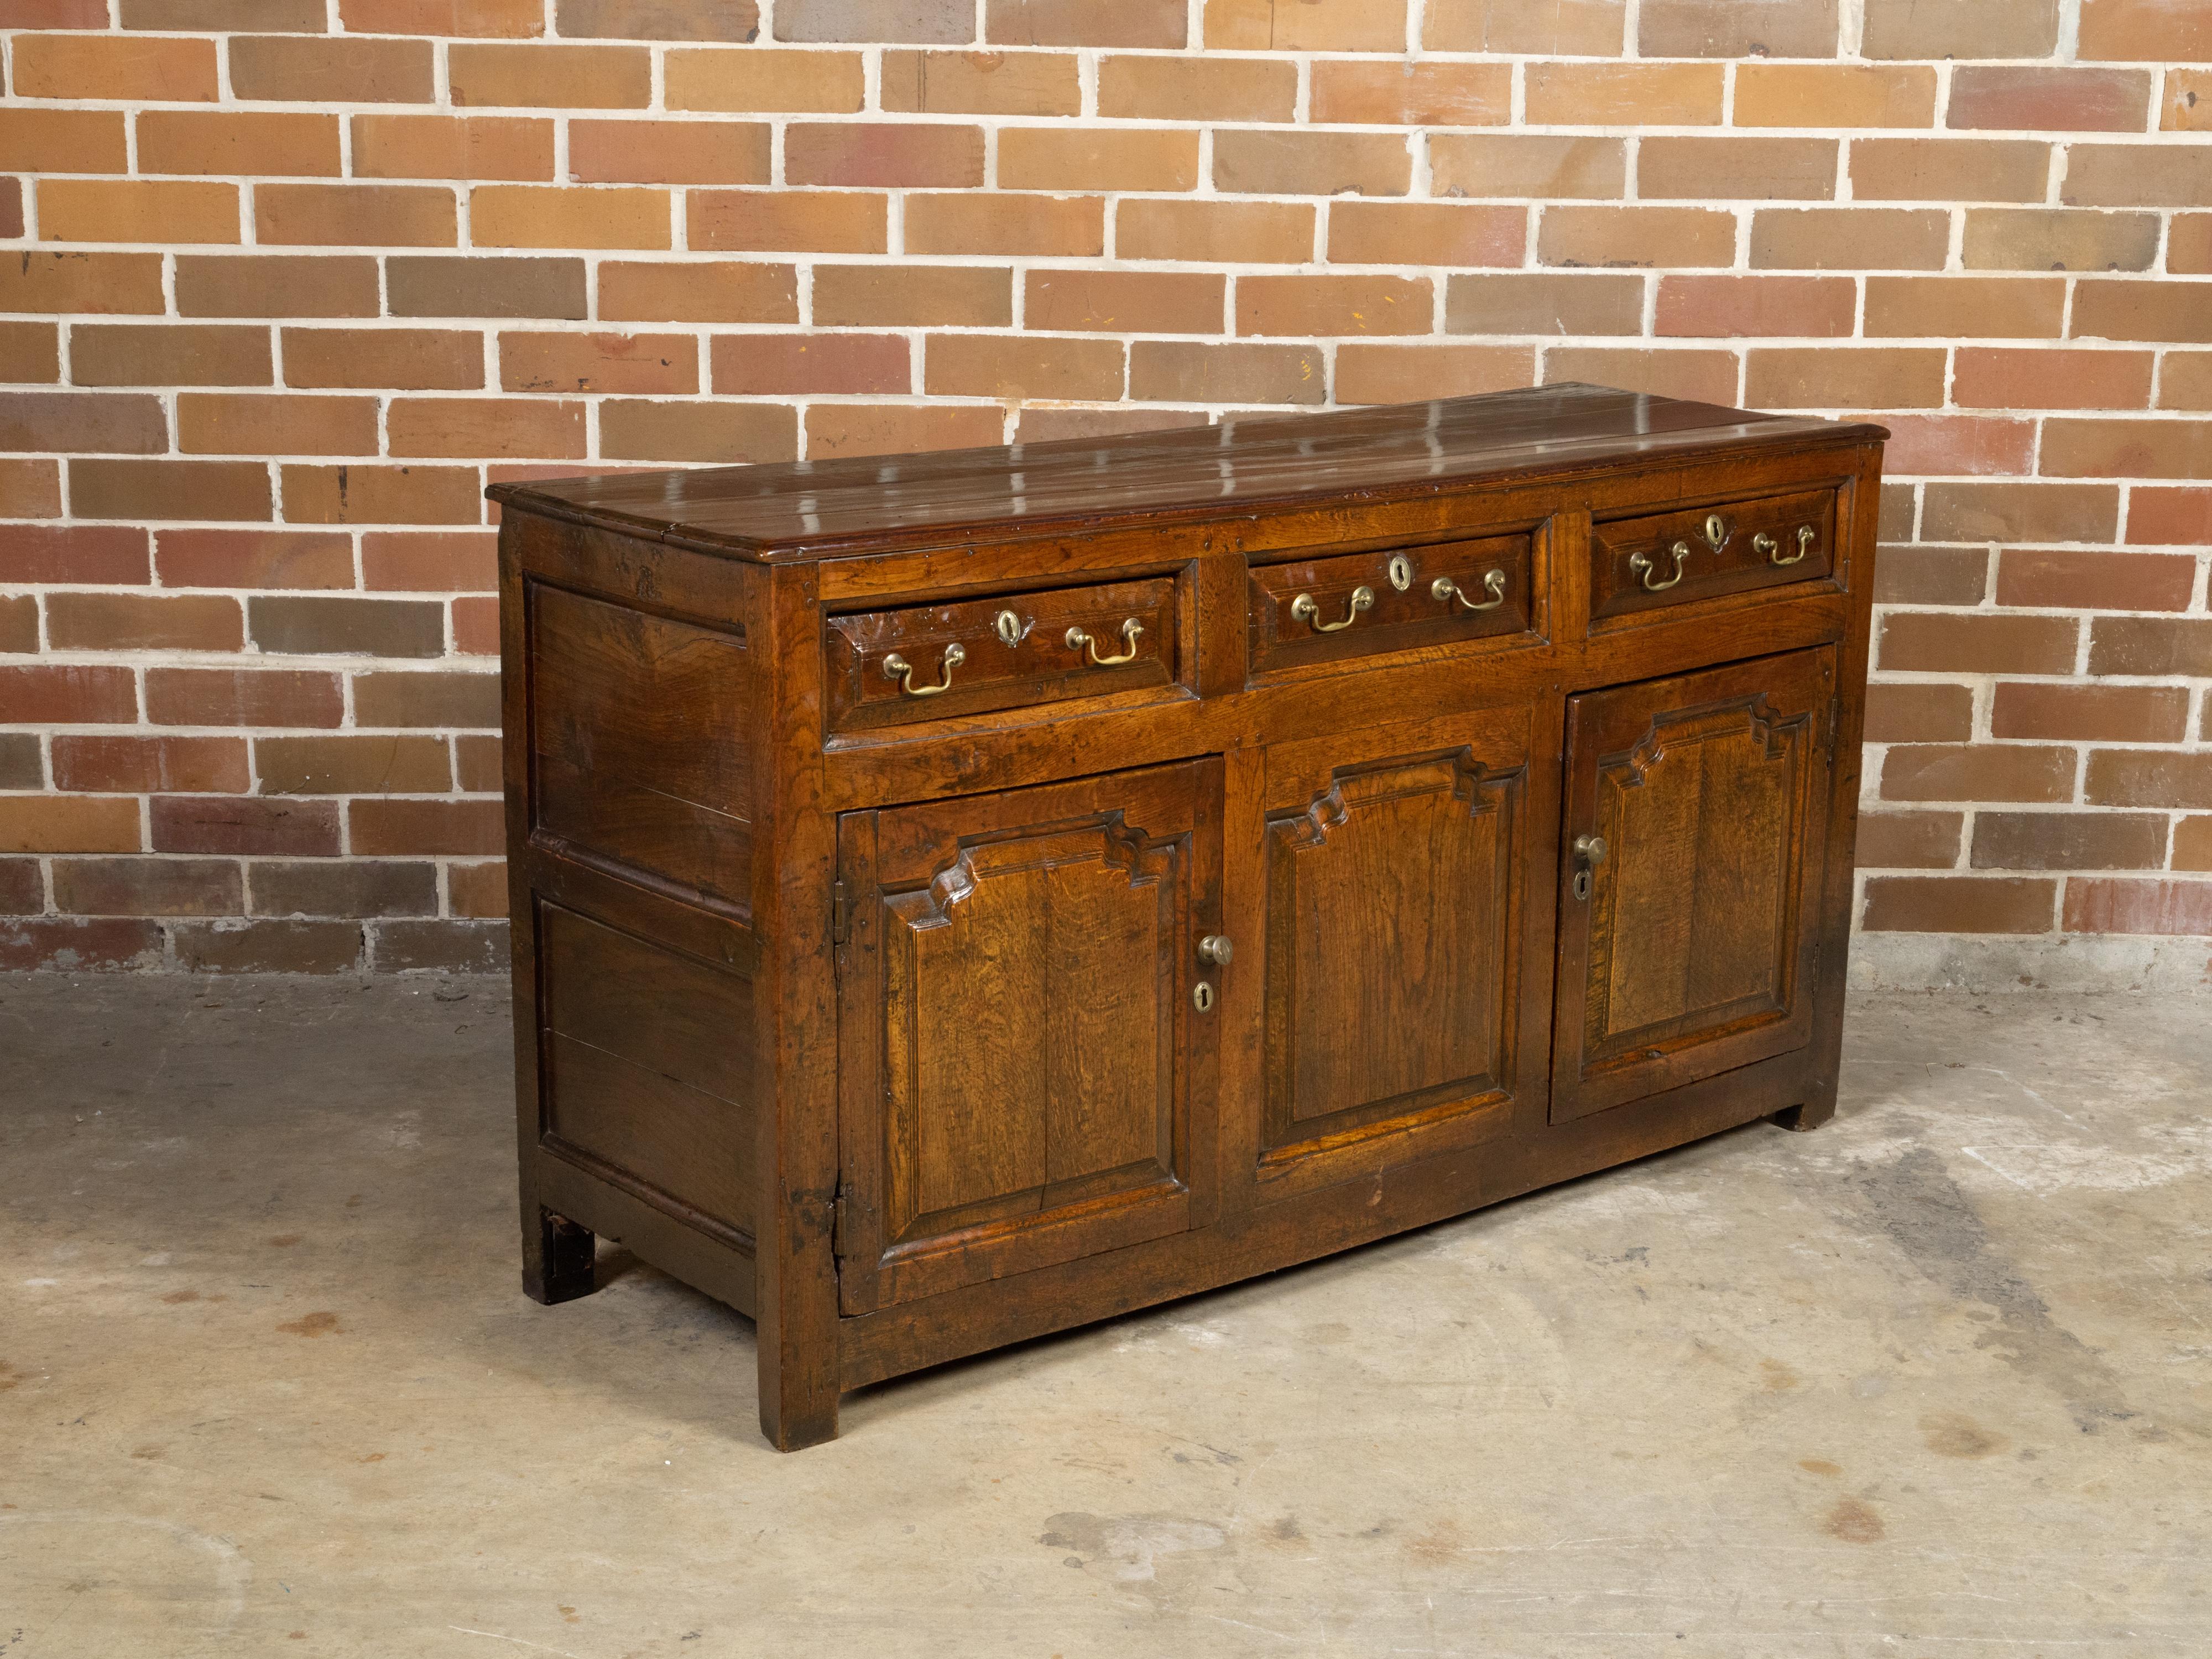 19th Century English Georgian Period 1800s Oak Dresser Base with Three Drawers and Two Doors